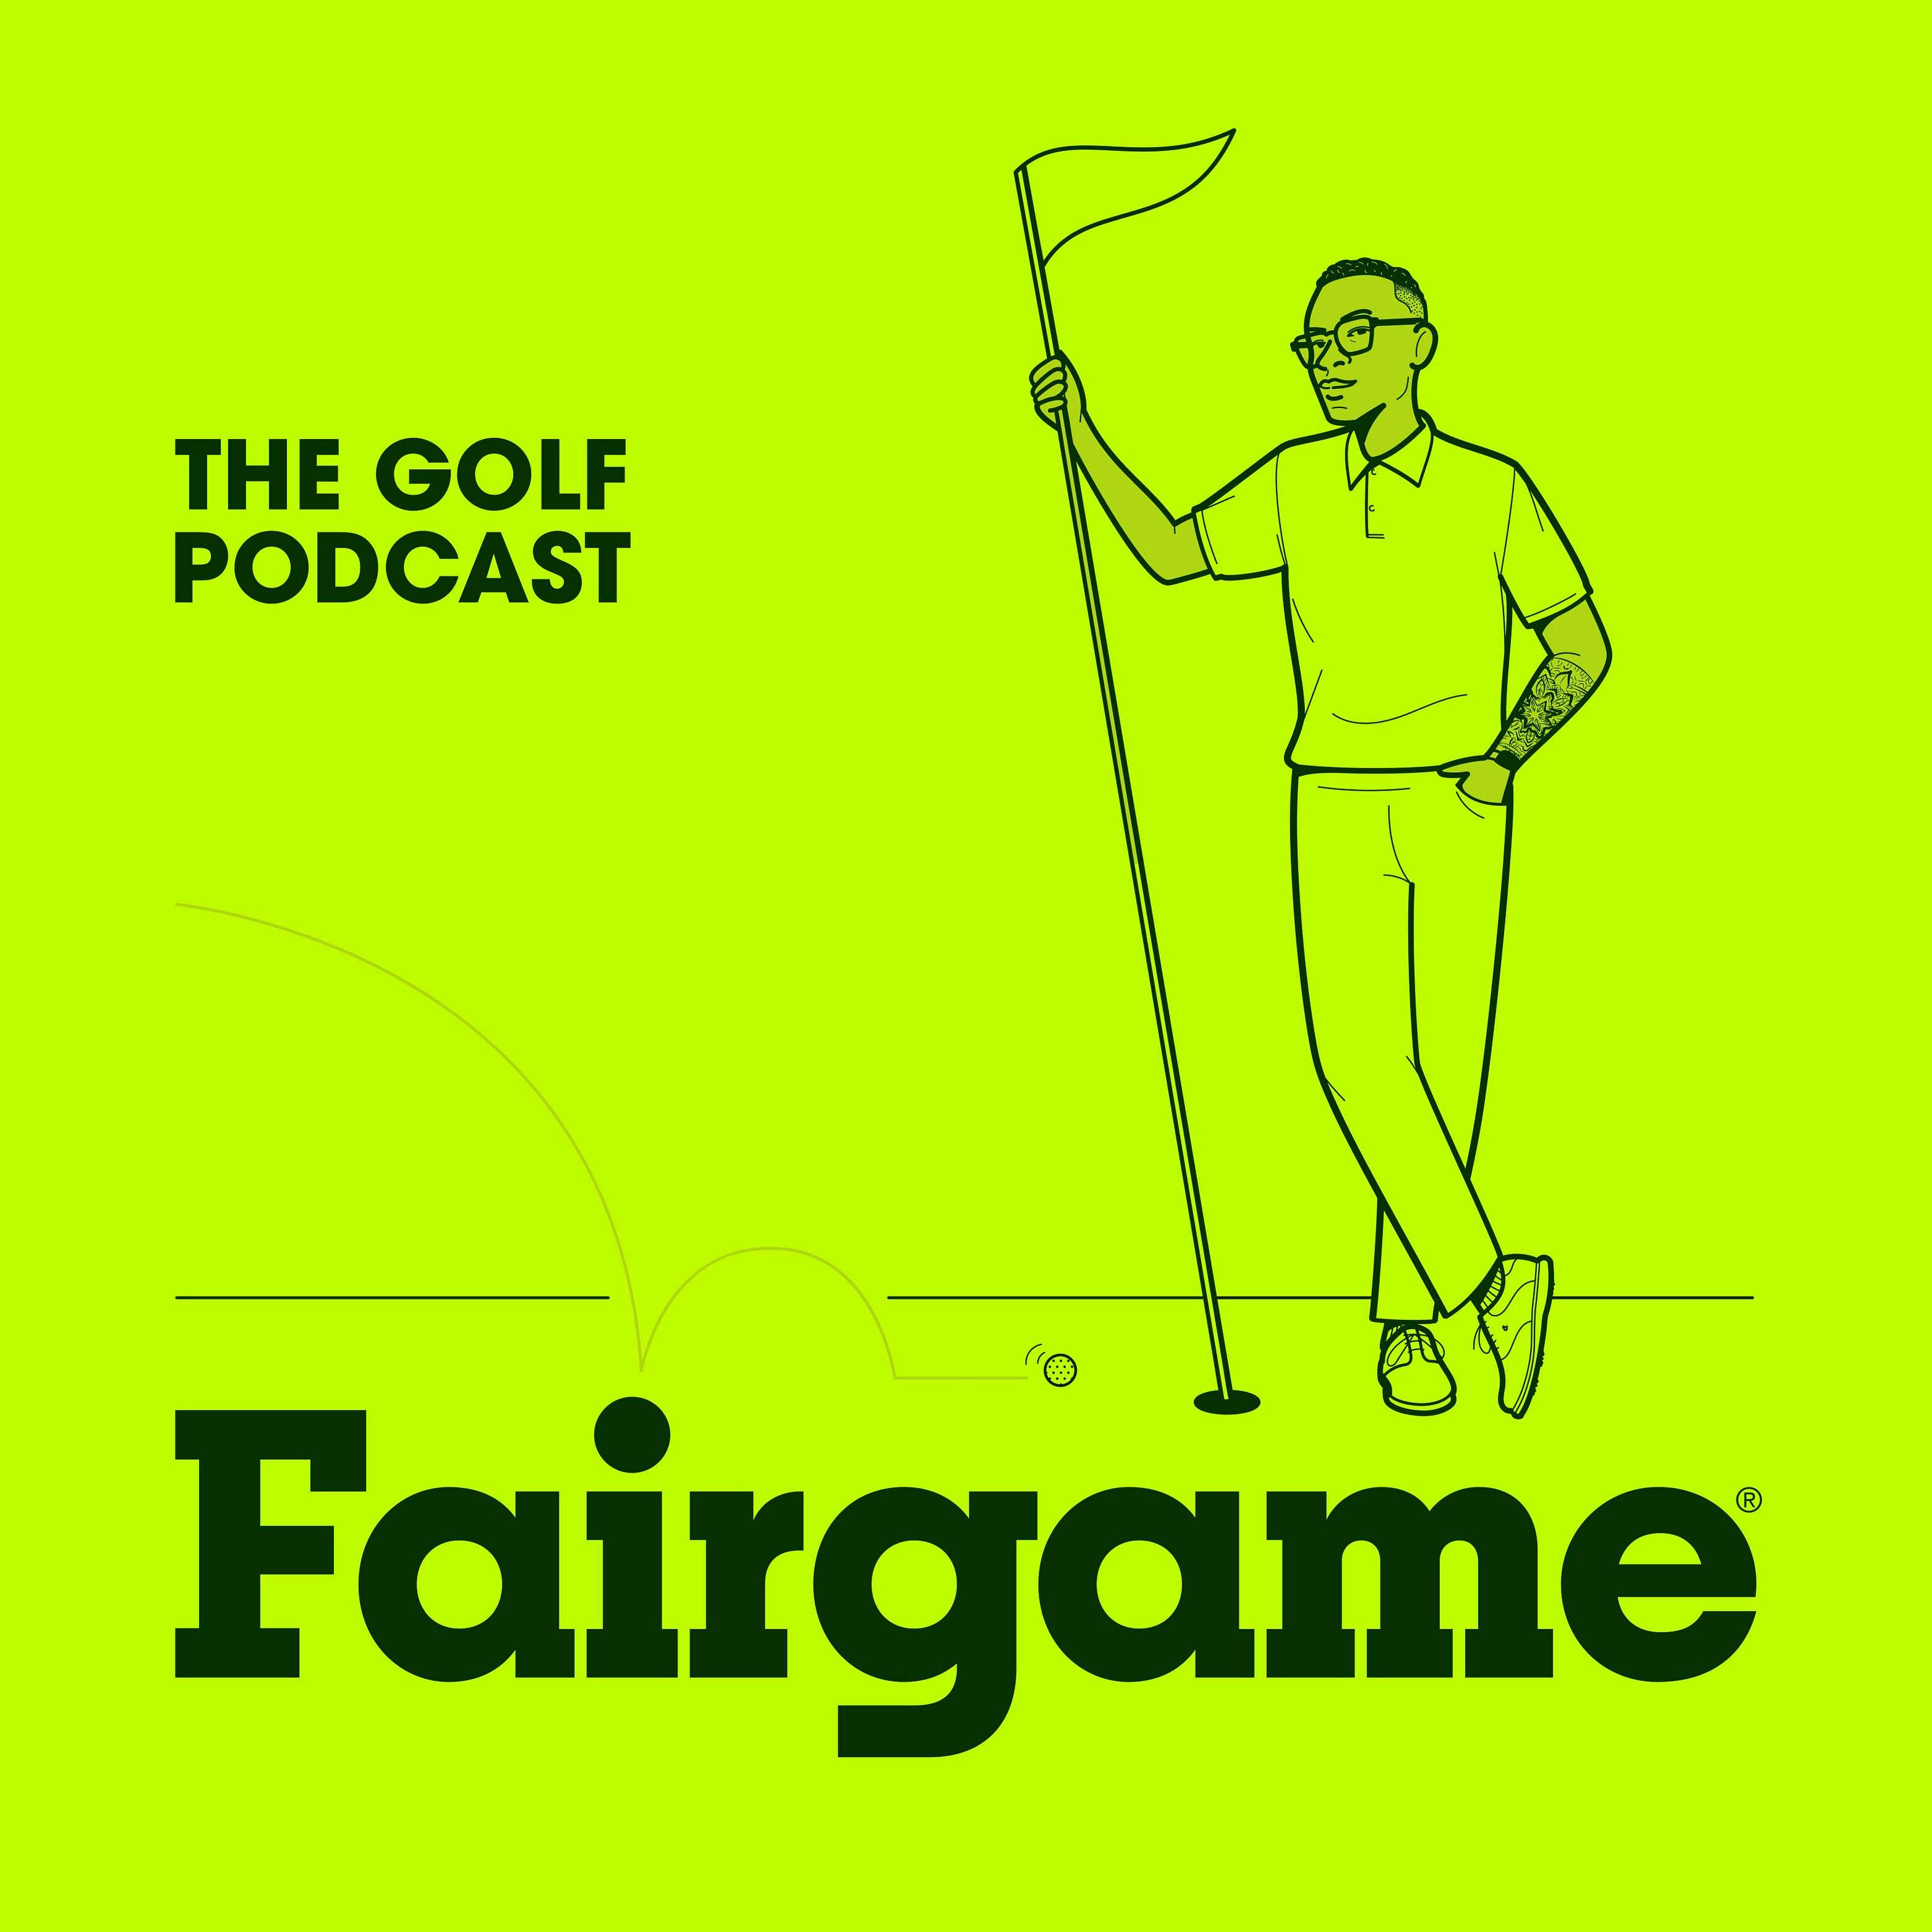 Episode 15: Female Golfers on Style, Gear & Experiences